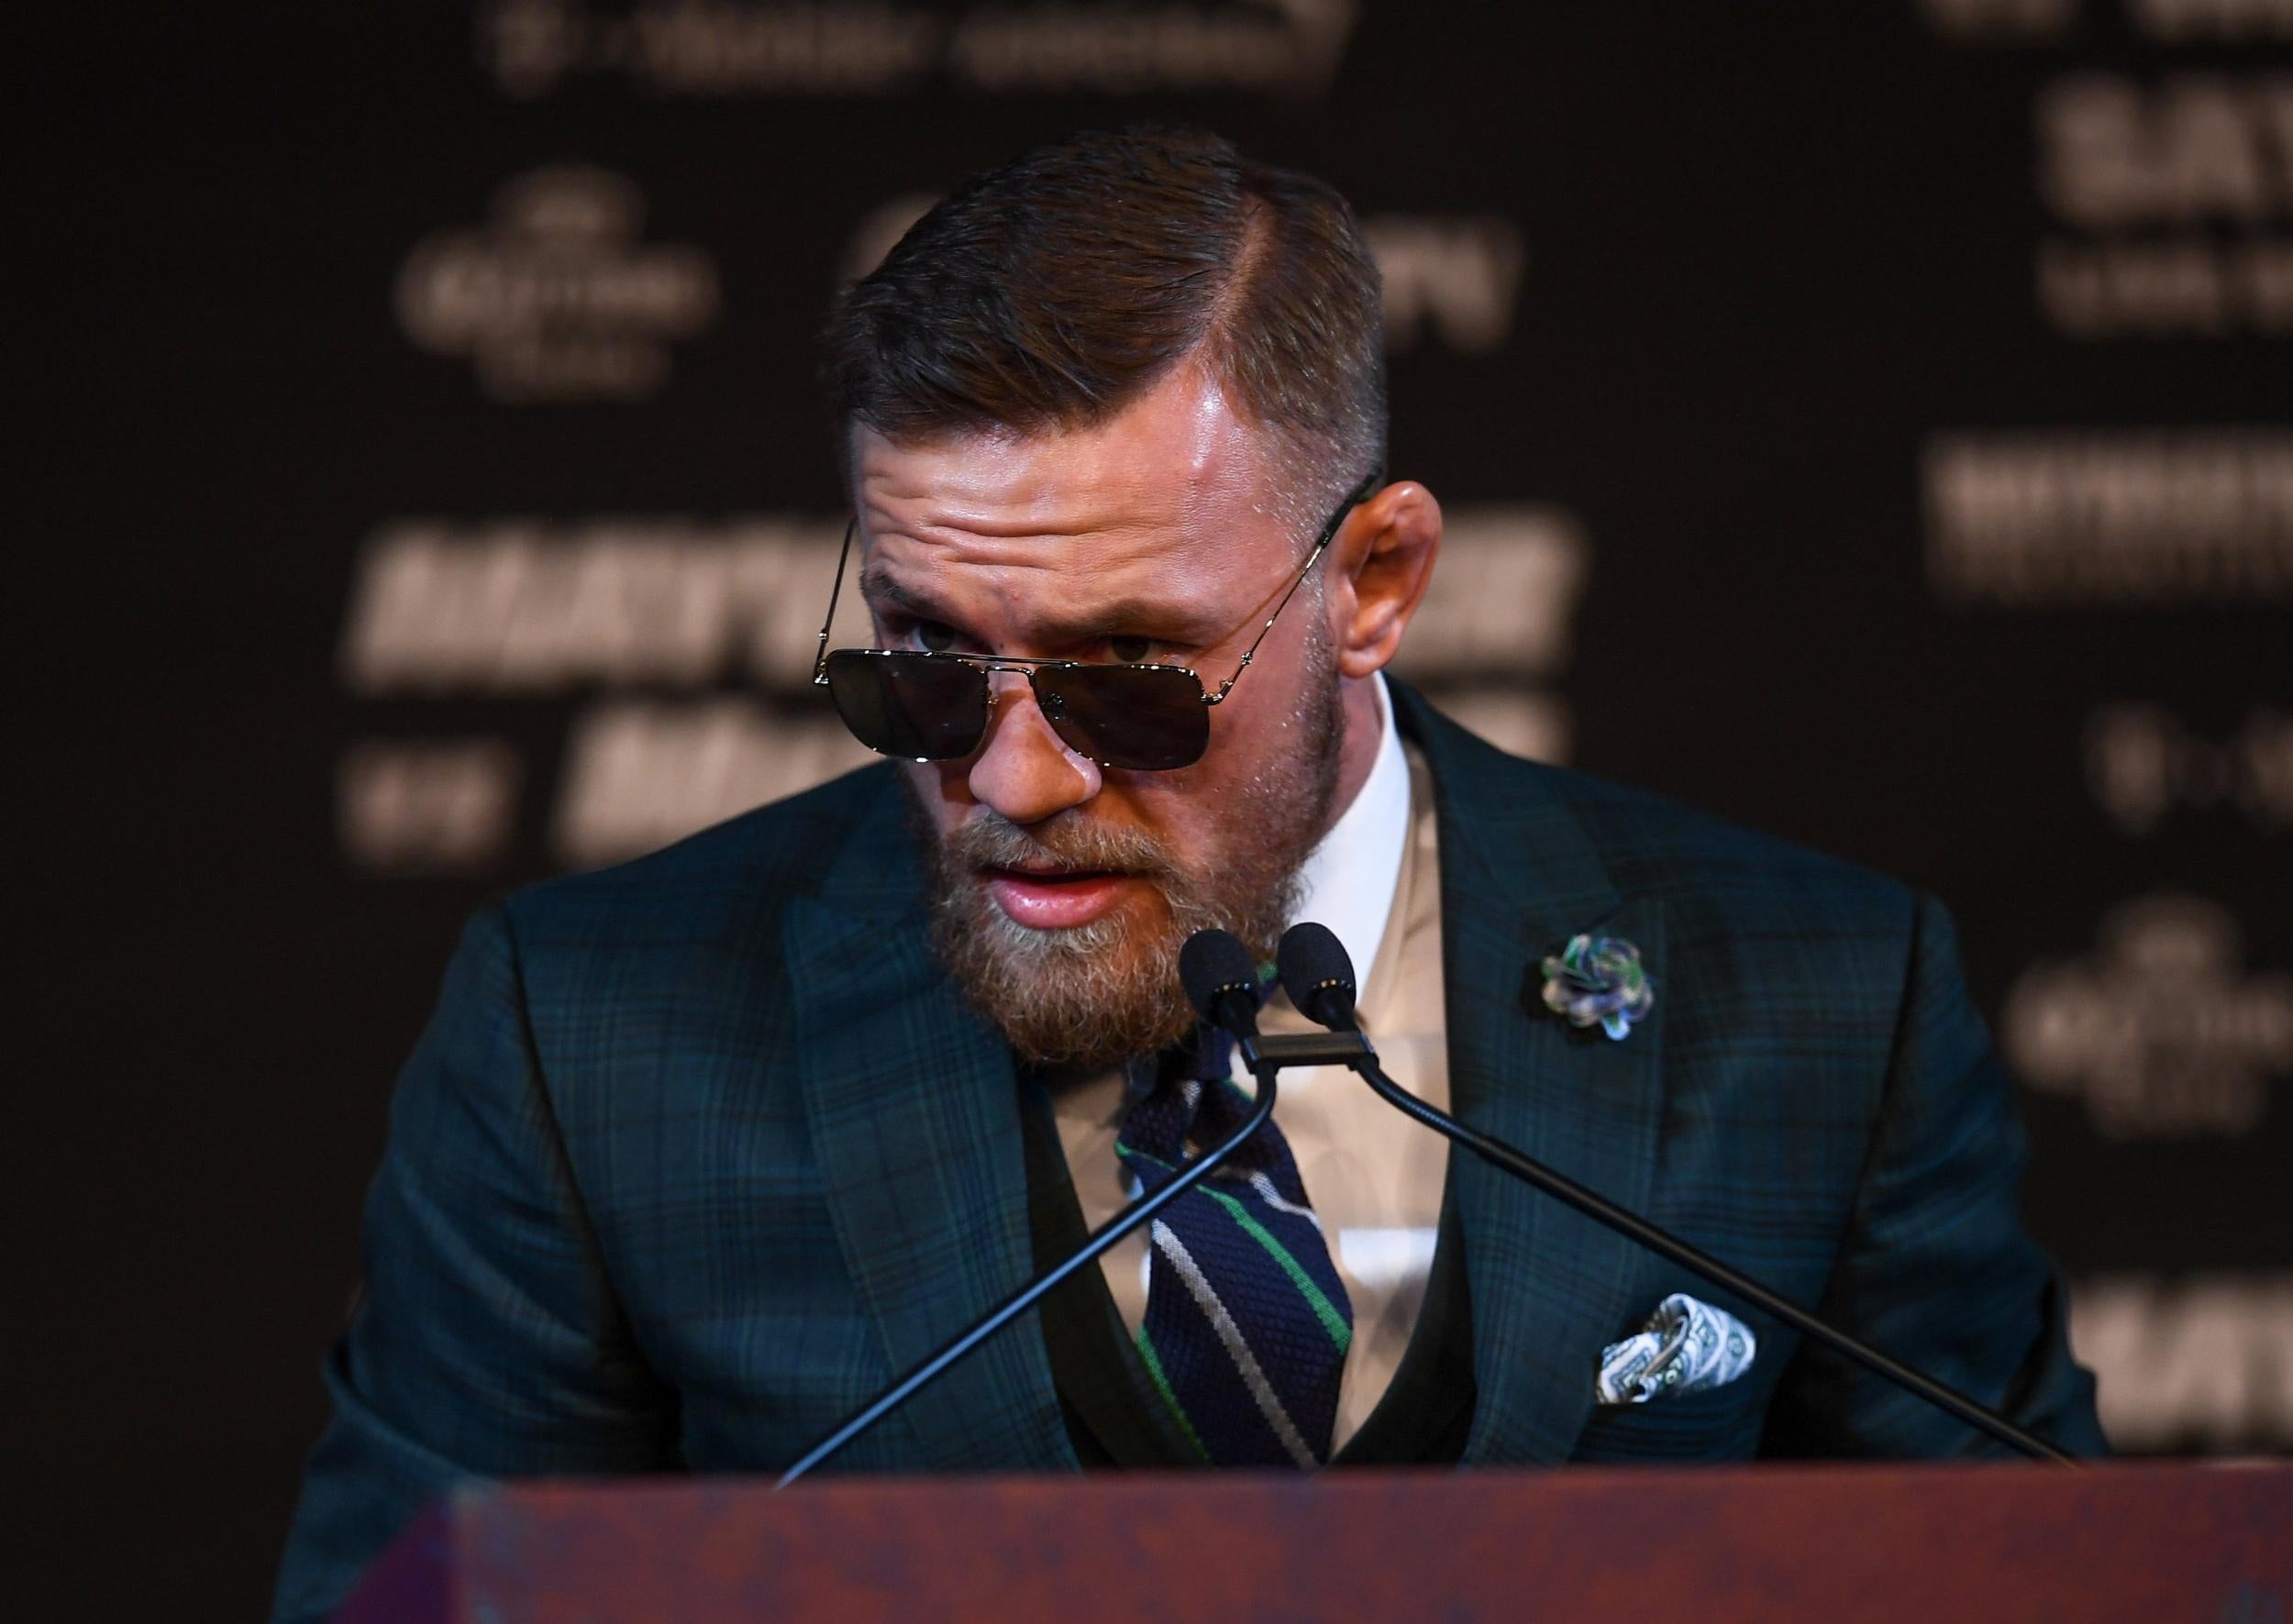 McGregor said he is considering setting up his own new sport